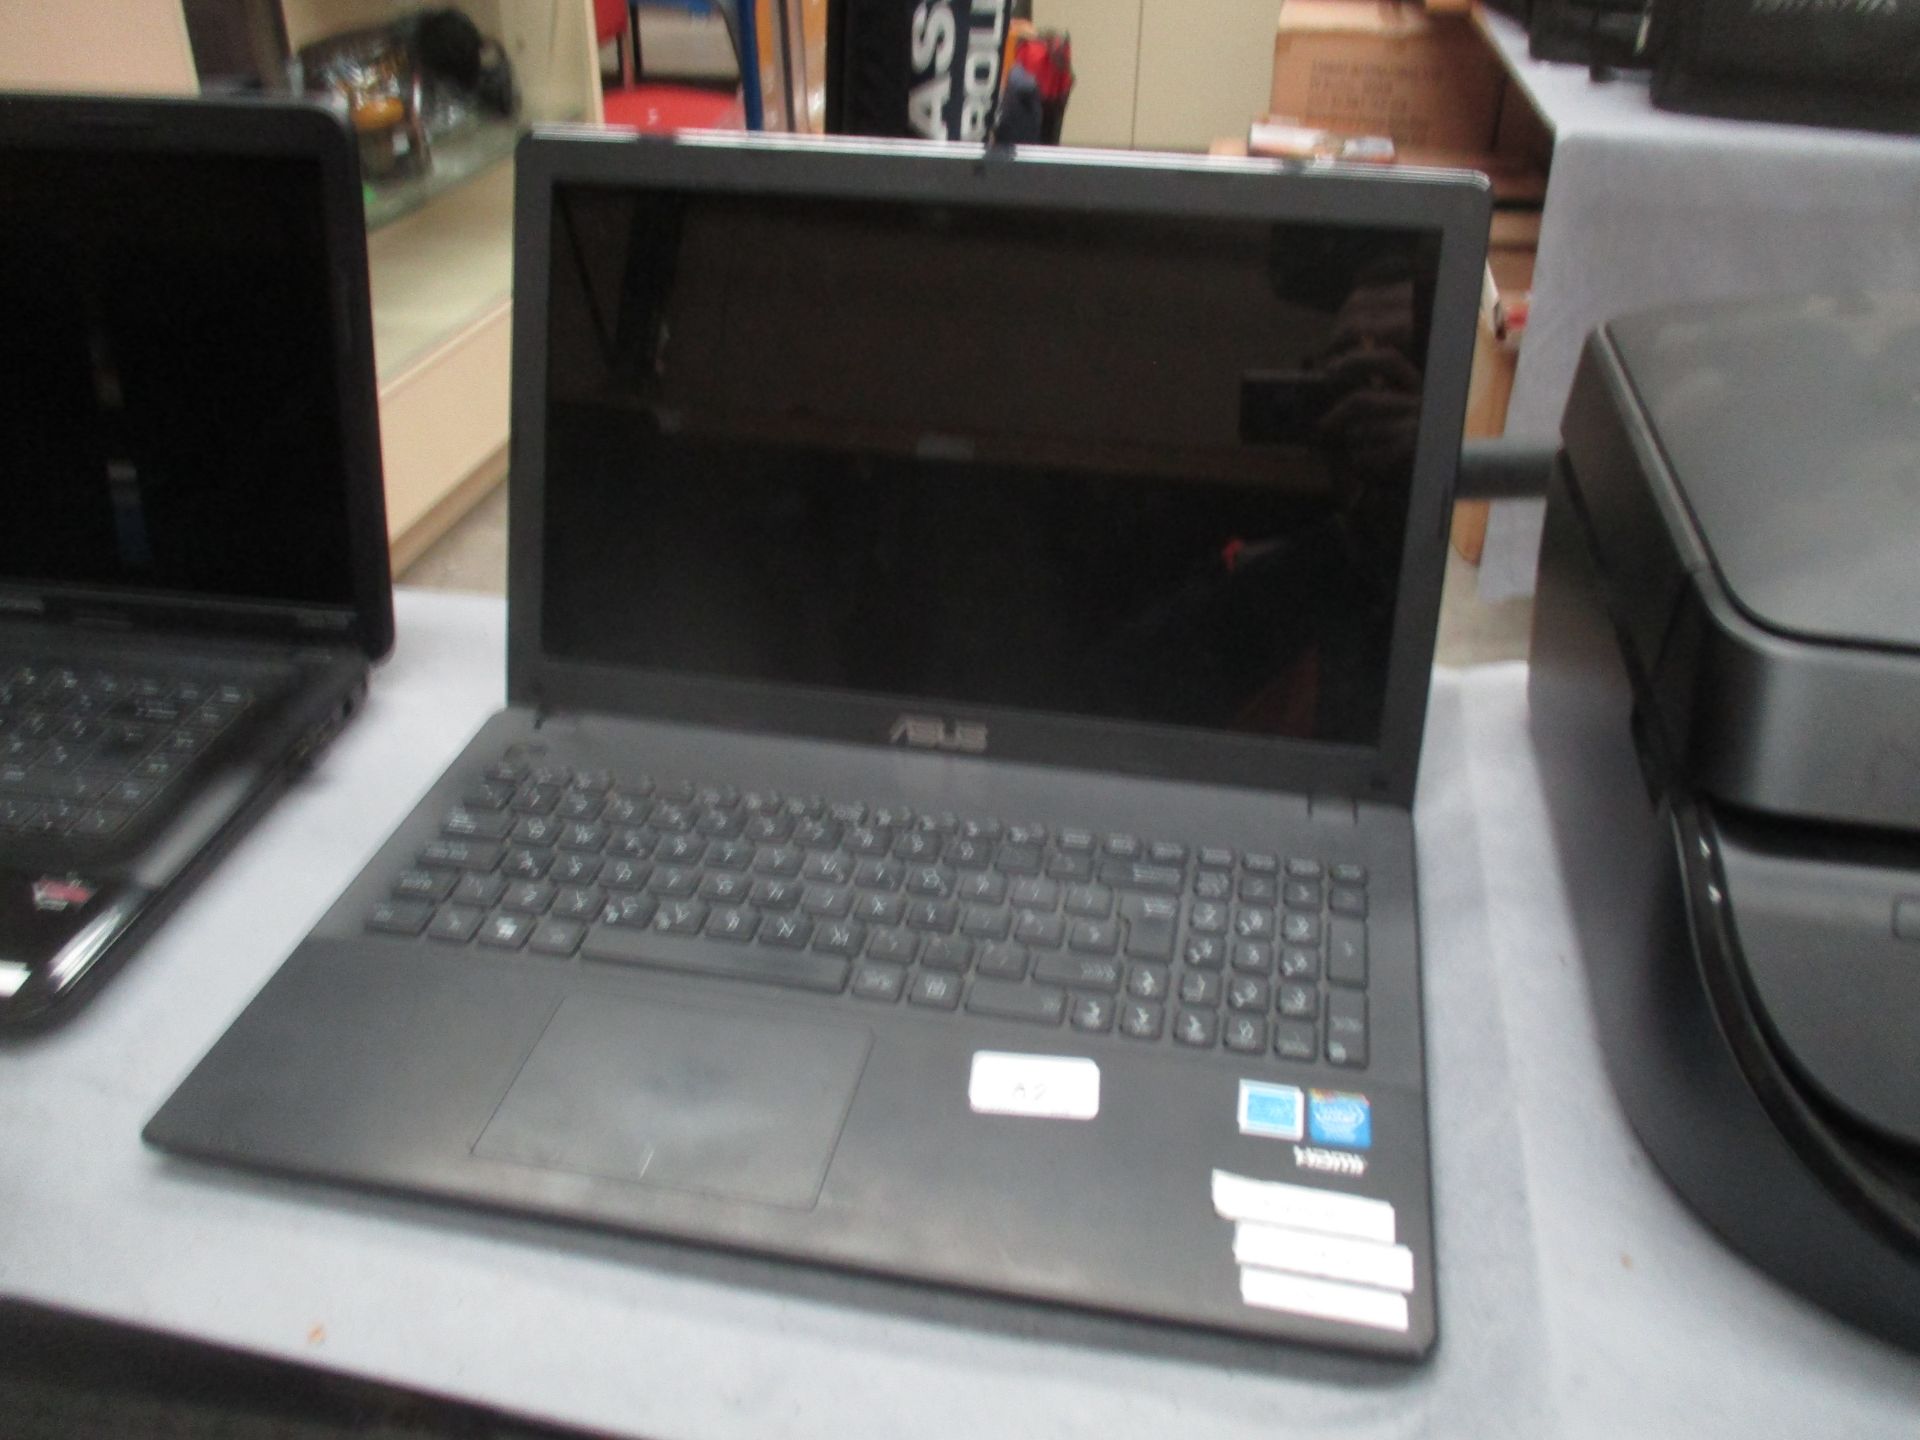 An ASUS F551M laptop computer with power lead